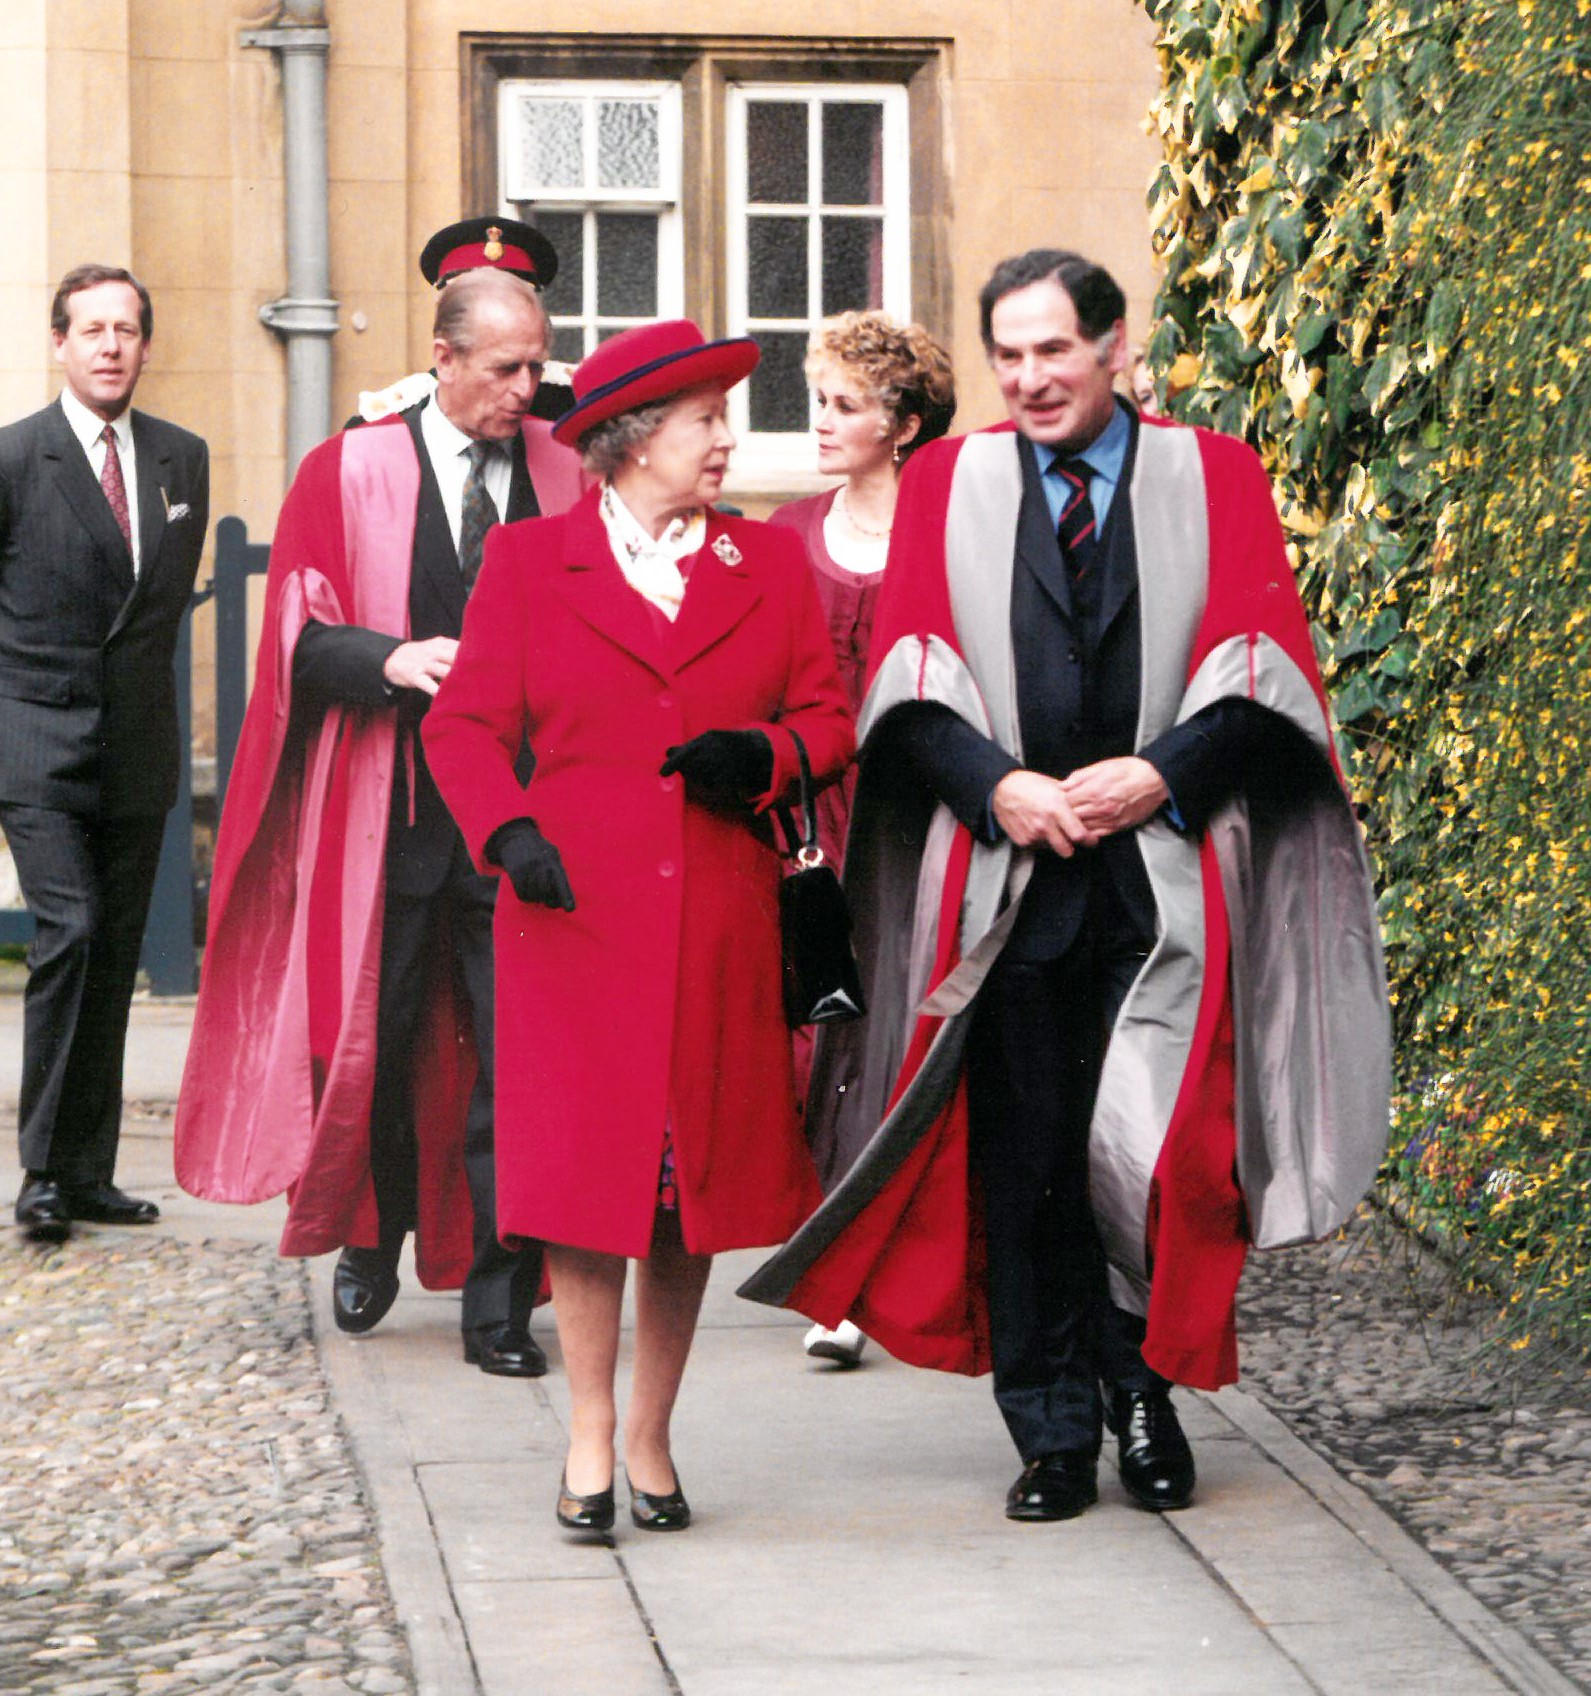 Her Majesty The Queen walking through Hall Court